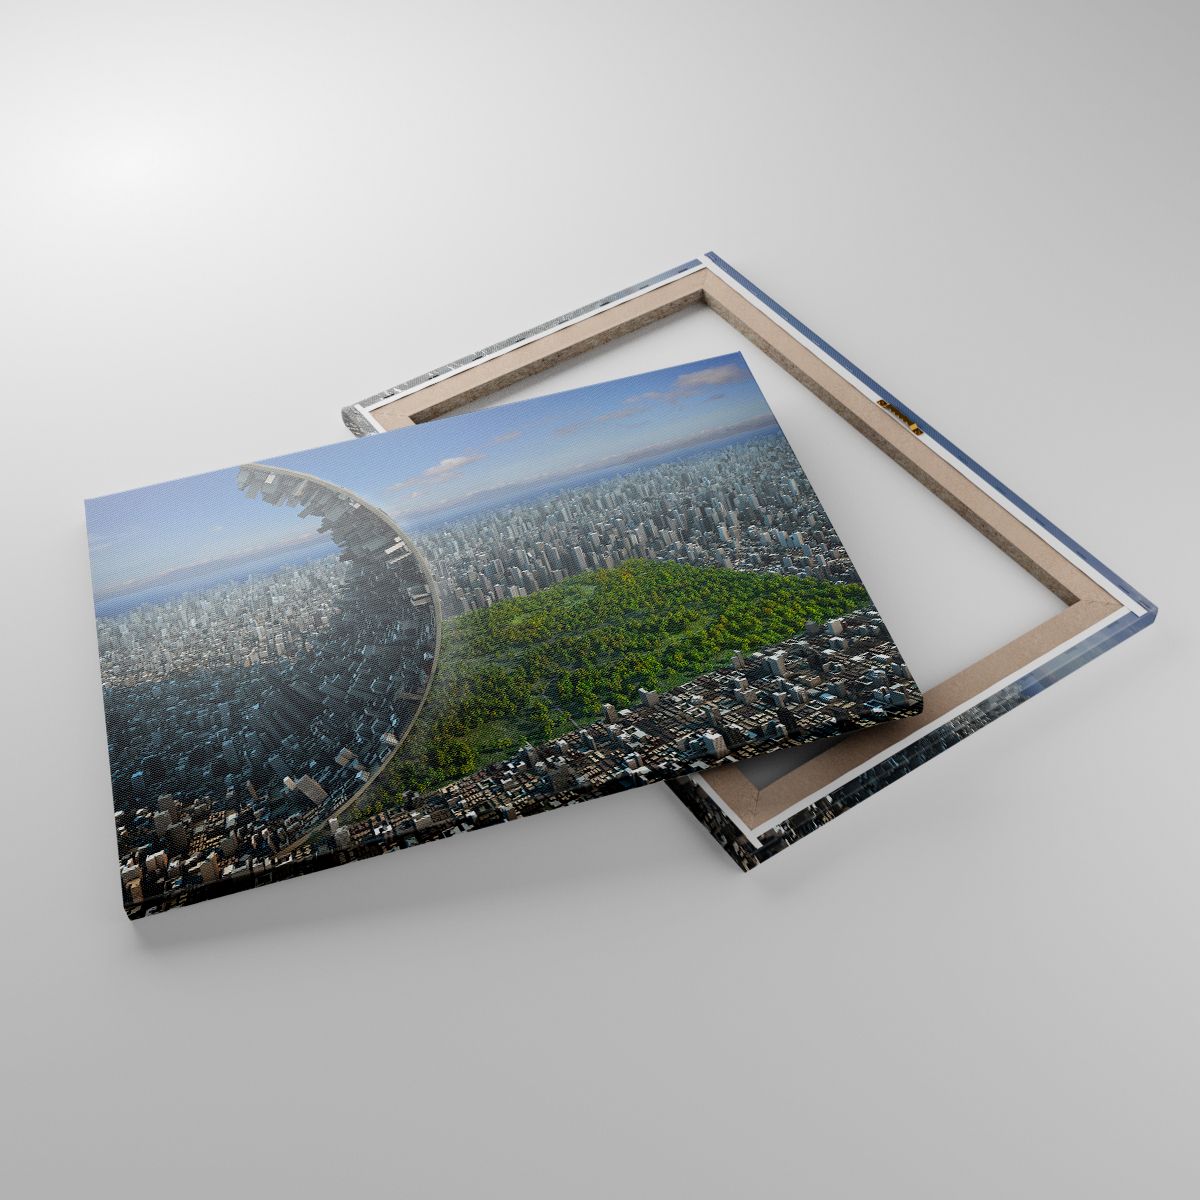 Impression Abstraction, Impression Architecture, Impression Concevoir, Impression Villes, Impression 3D